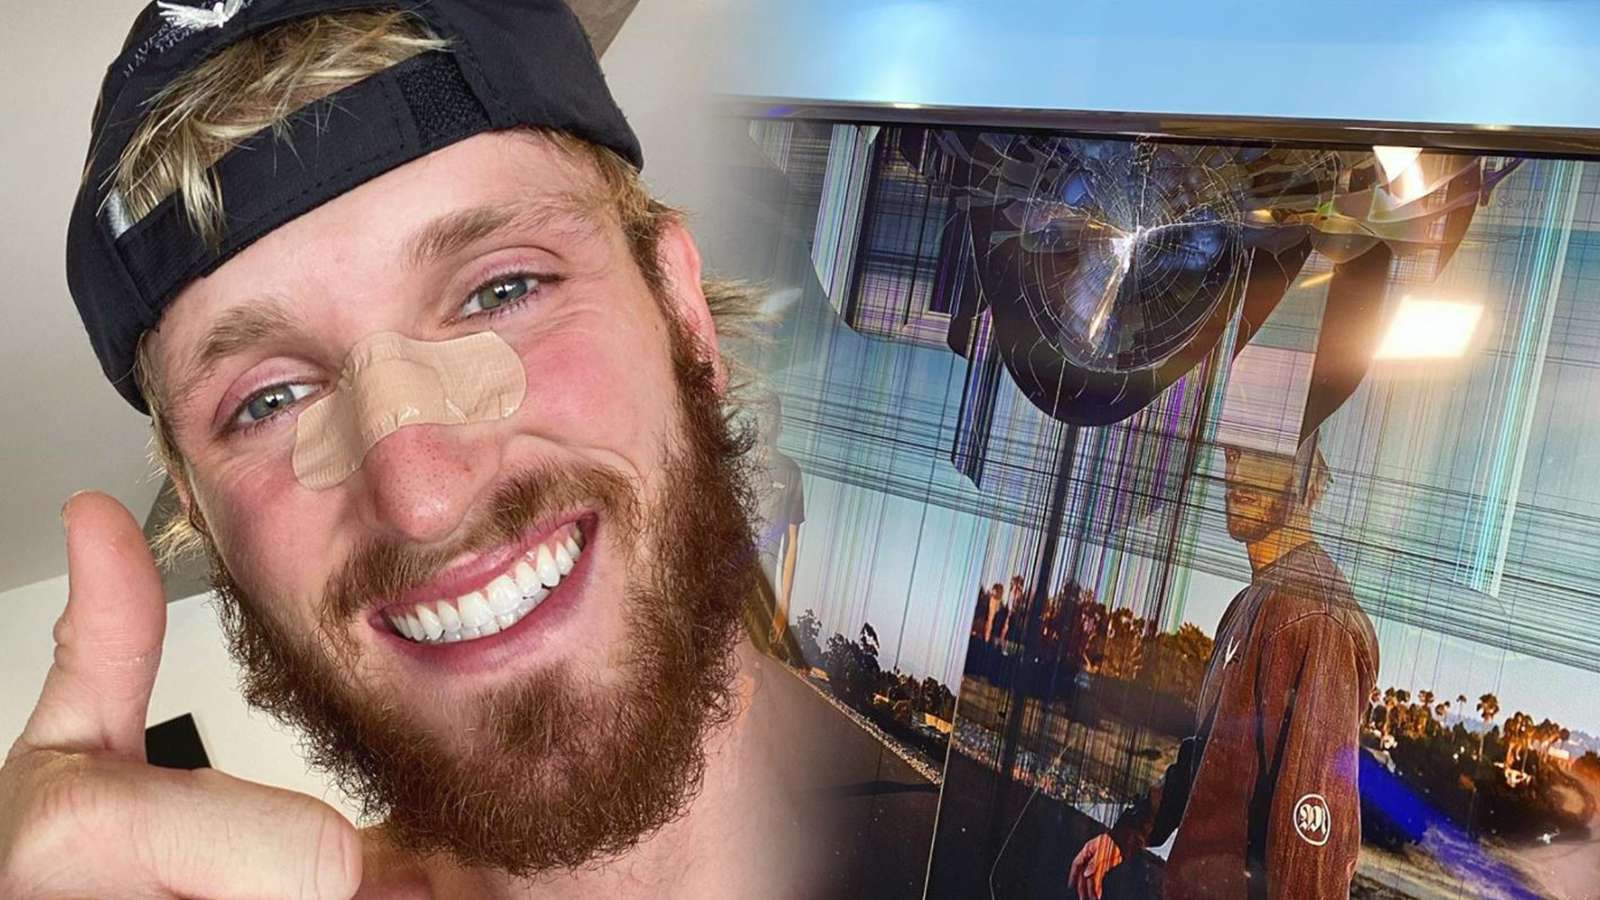 Logan Paul smiles with a bandaid on his nose, side-by-side with a photo of a broken television screen.